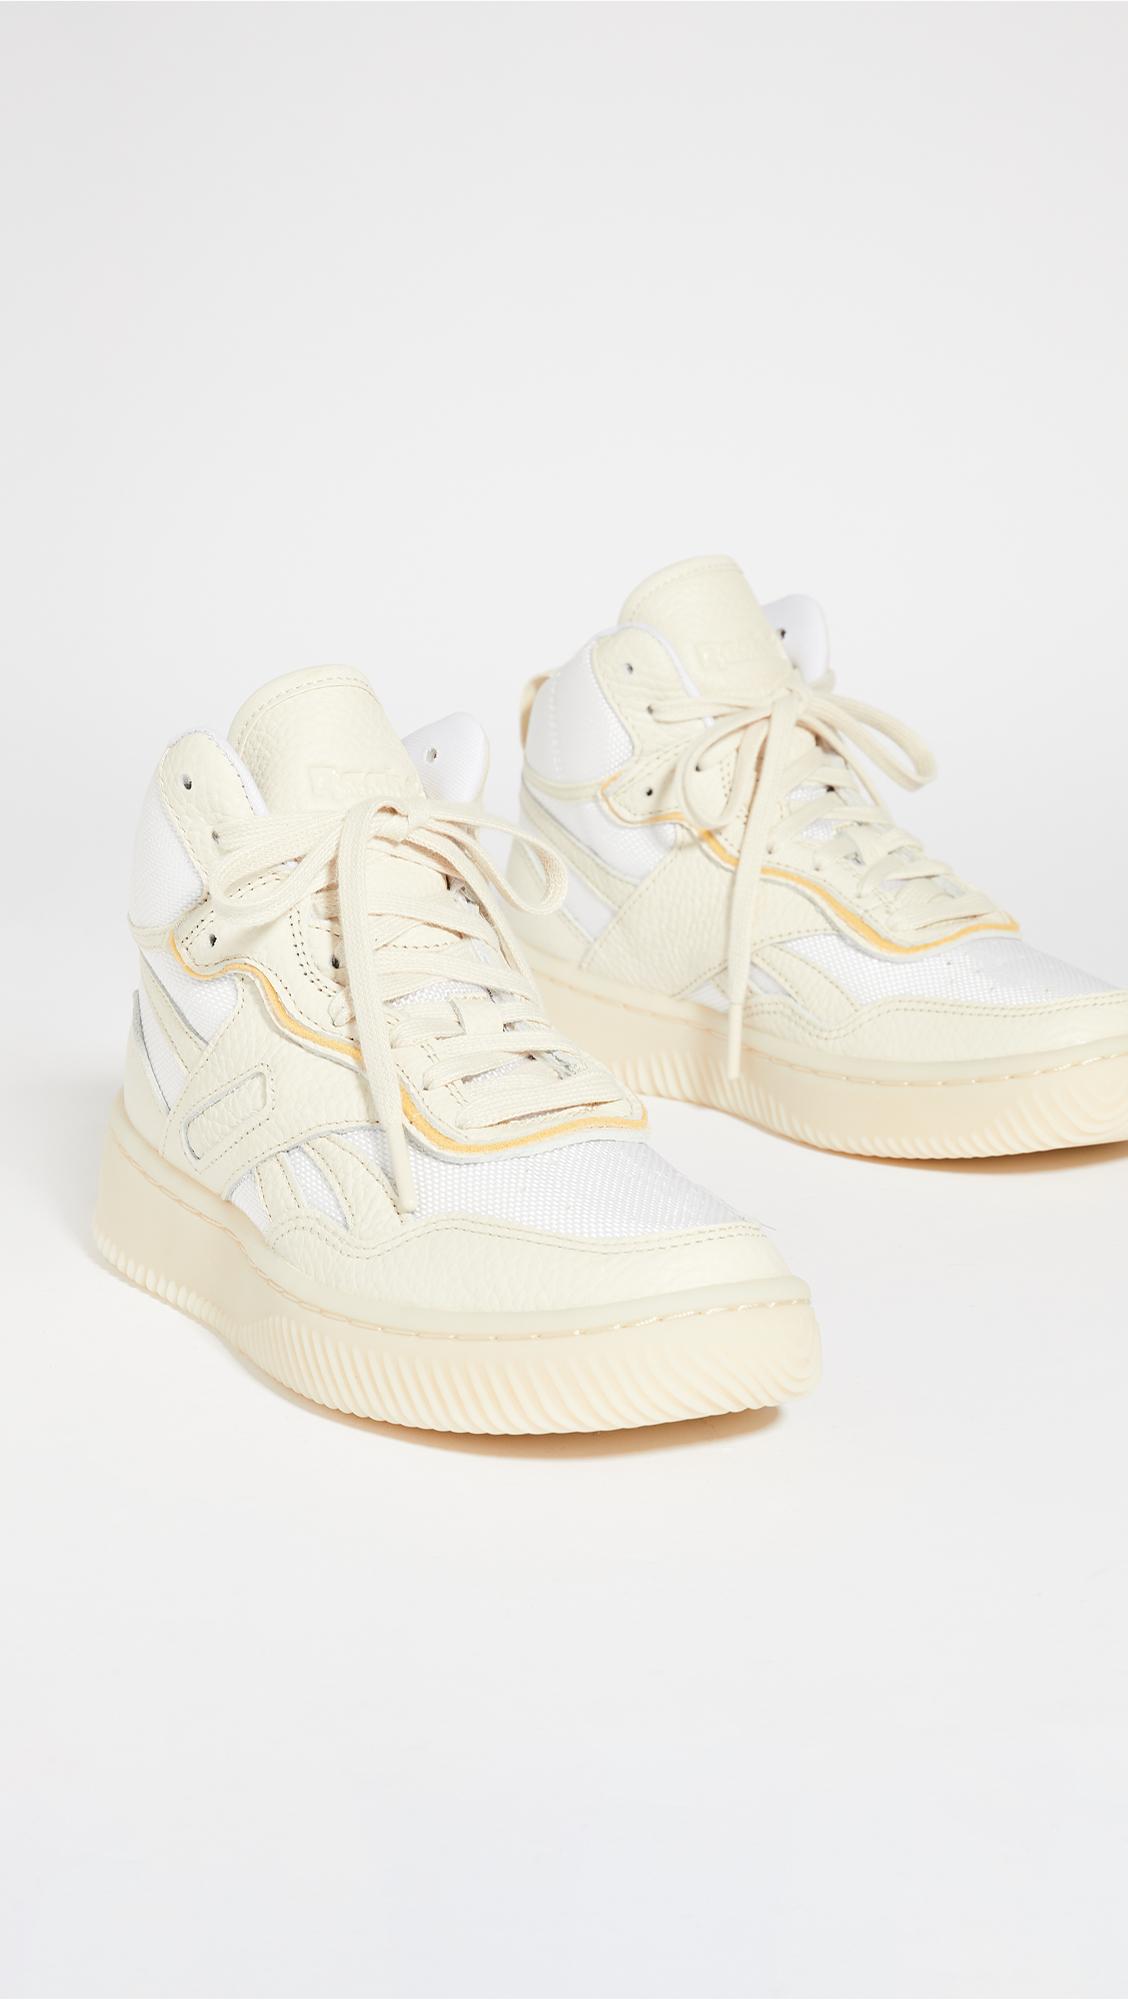 Reebok X Victoria Beckham Dual Court Mid Ii Vb Sneakers in White | Lyst